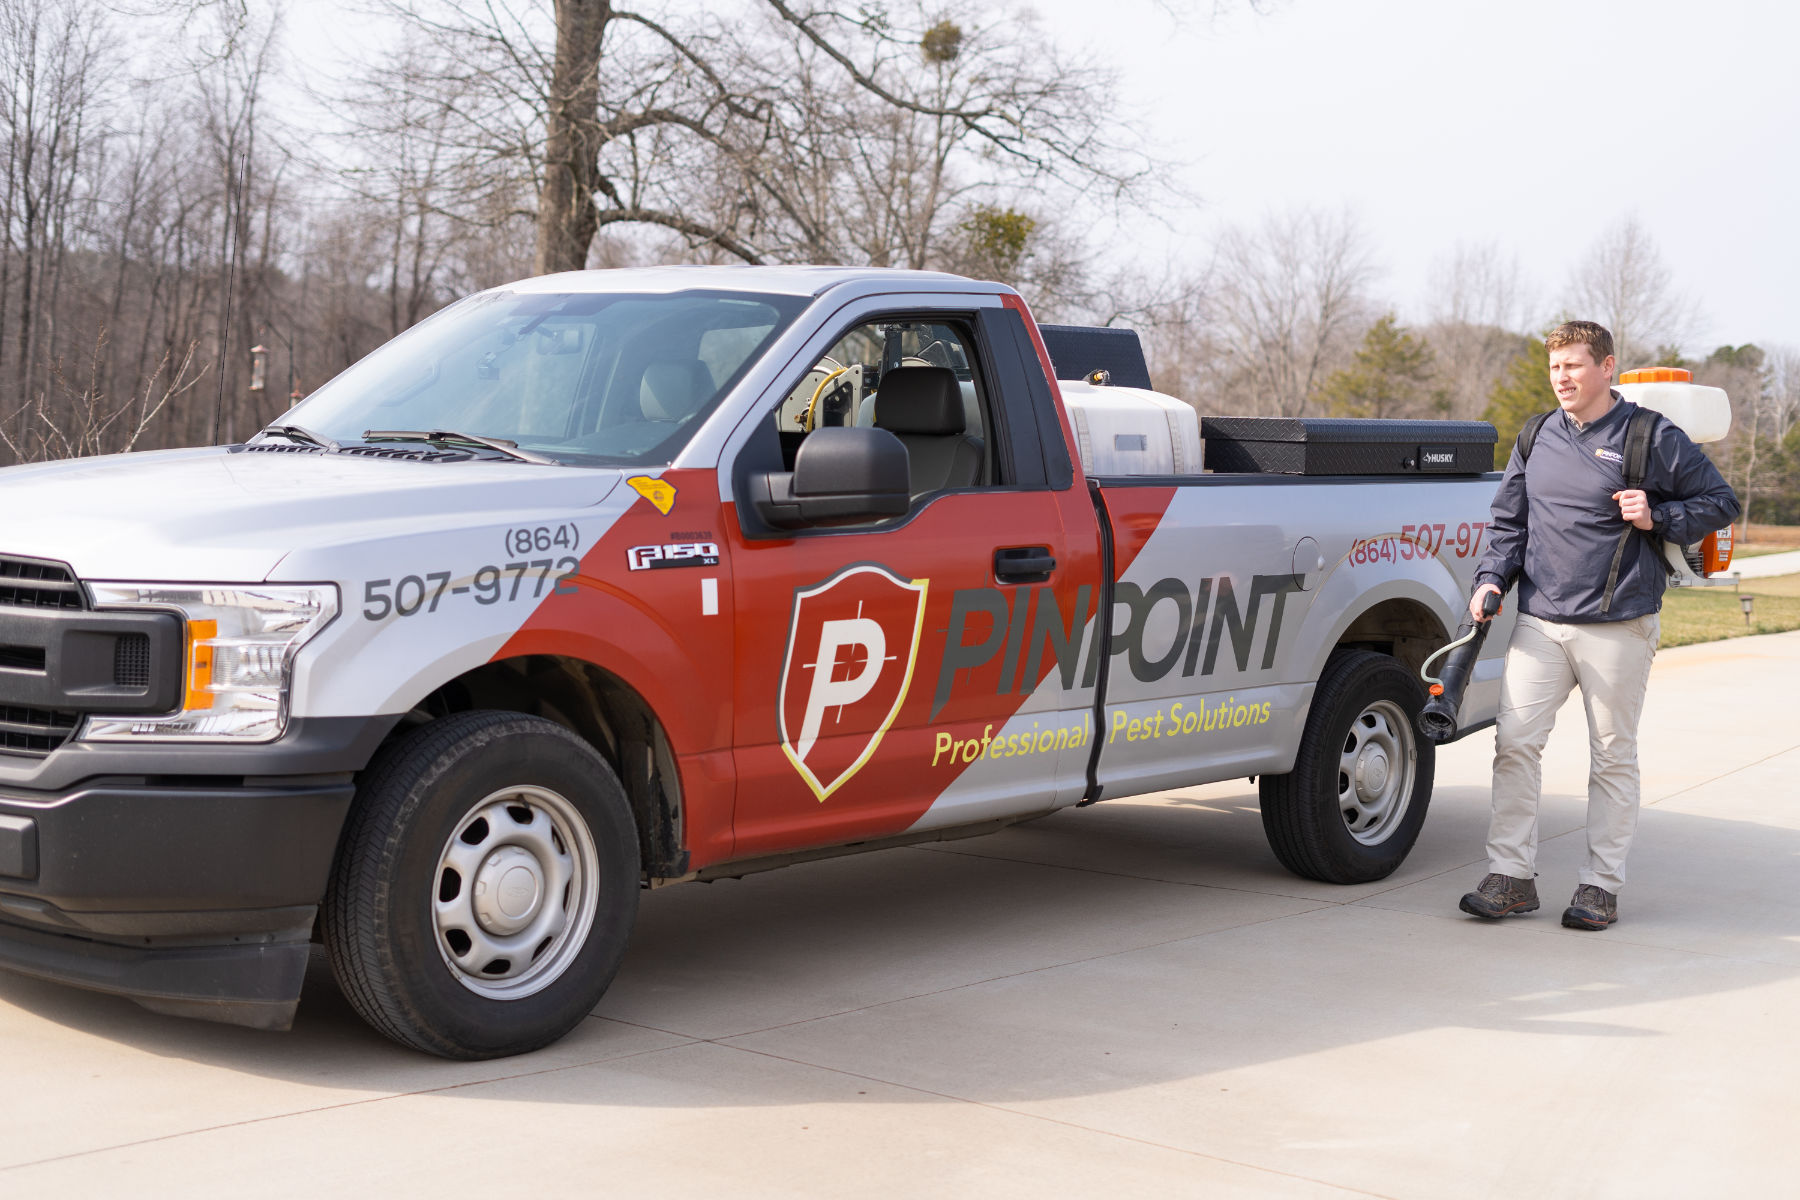 Pinpoint Pest Solutions | Heard Media